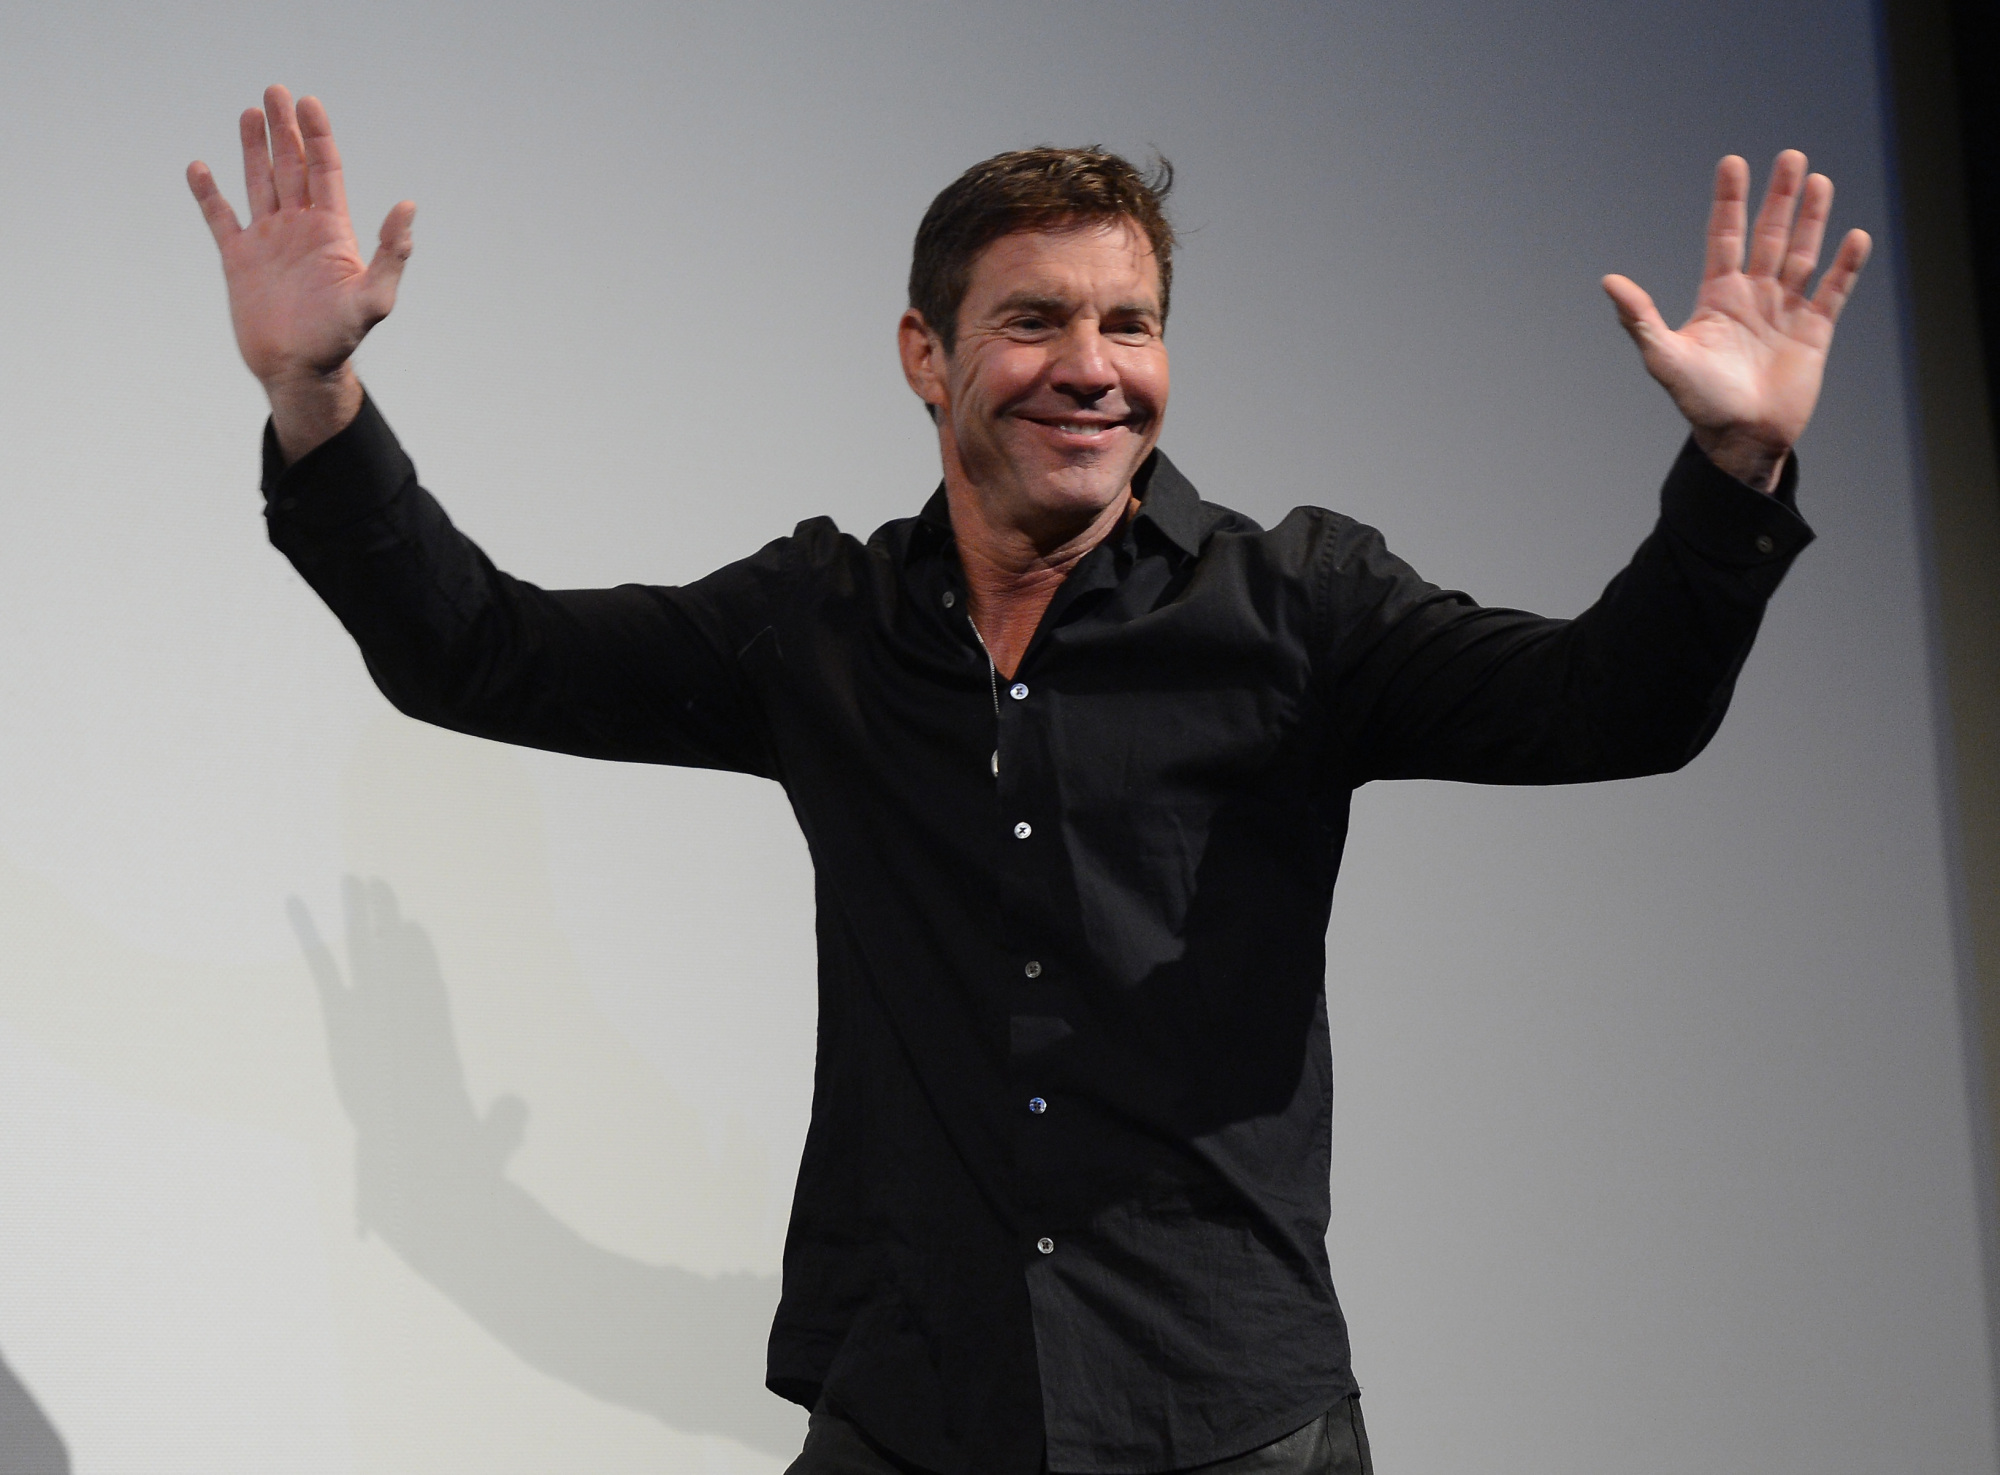 Dennis Quaid with his hands raised above his head. 